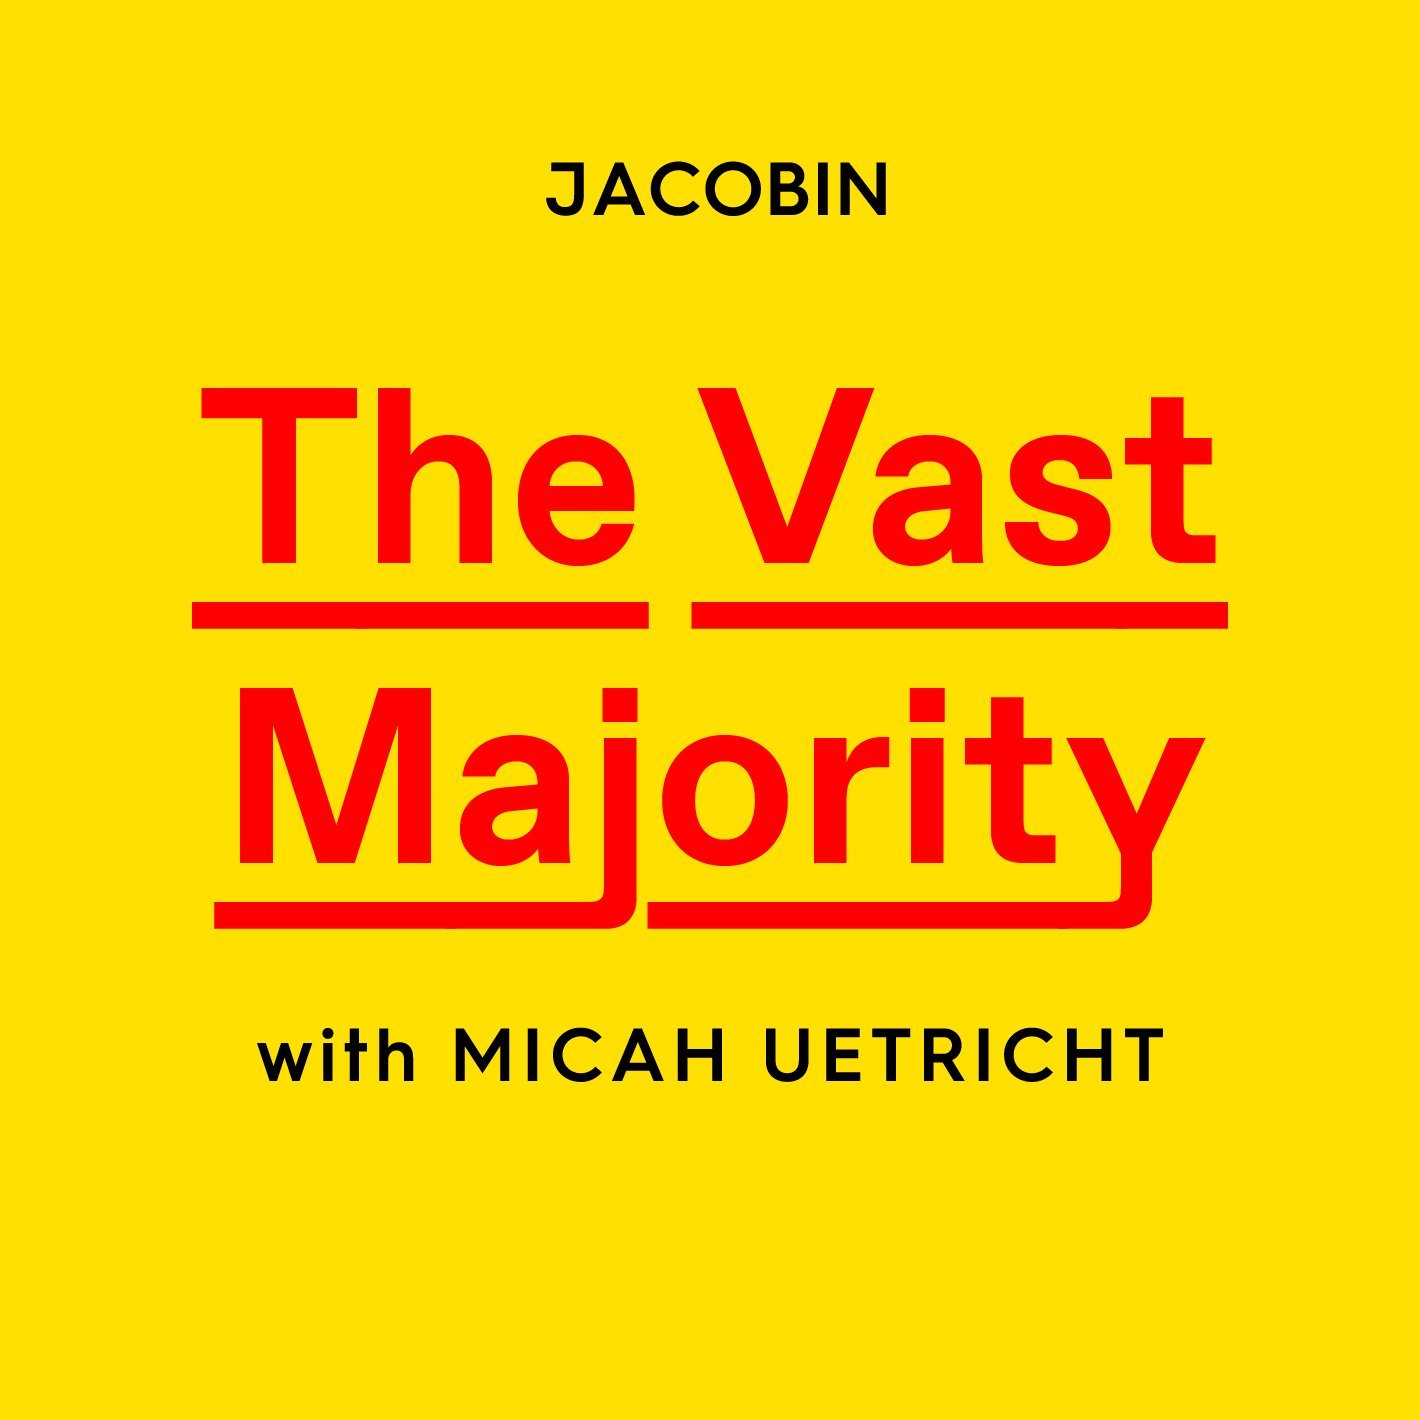 A socialist podcast from @jacobinmag. Hosted by @micahuetricht. Produced by @sarahjhurd.